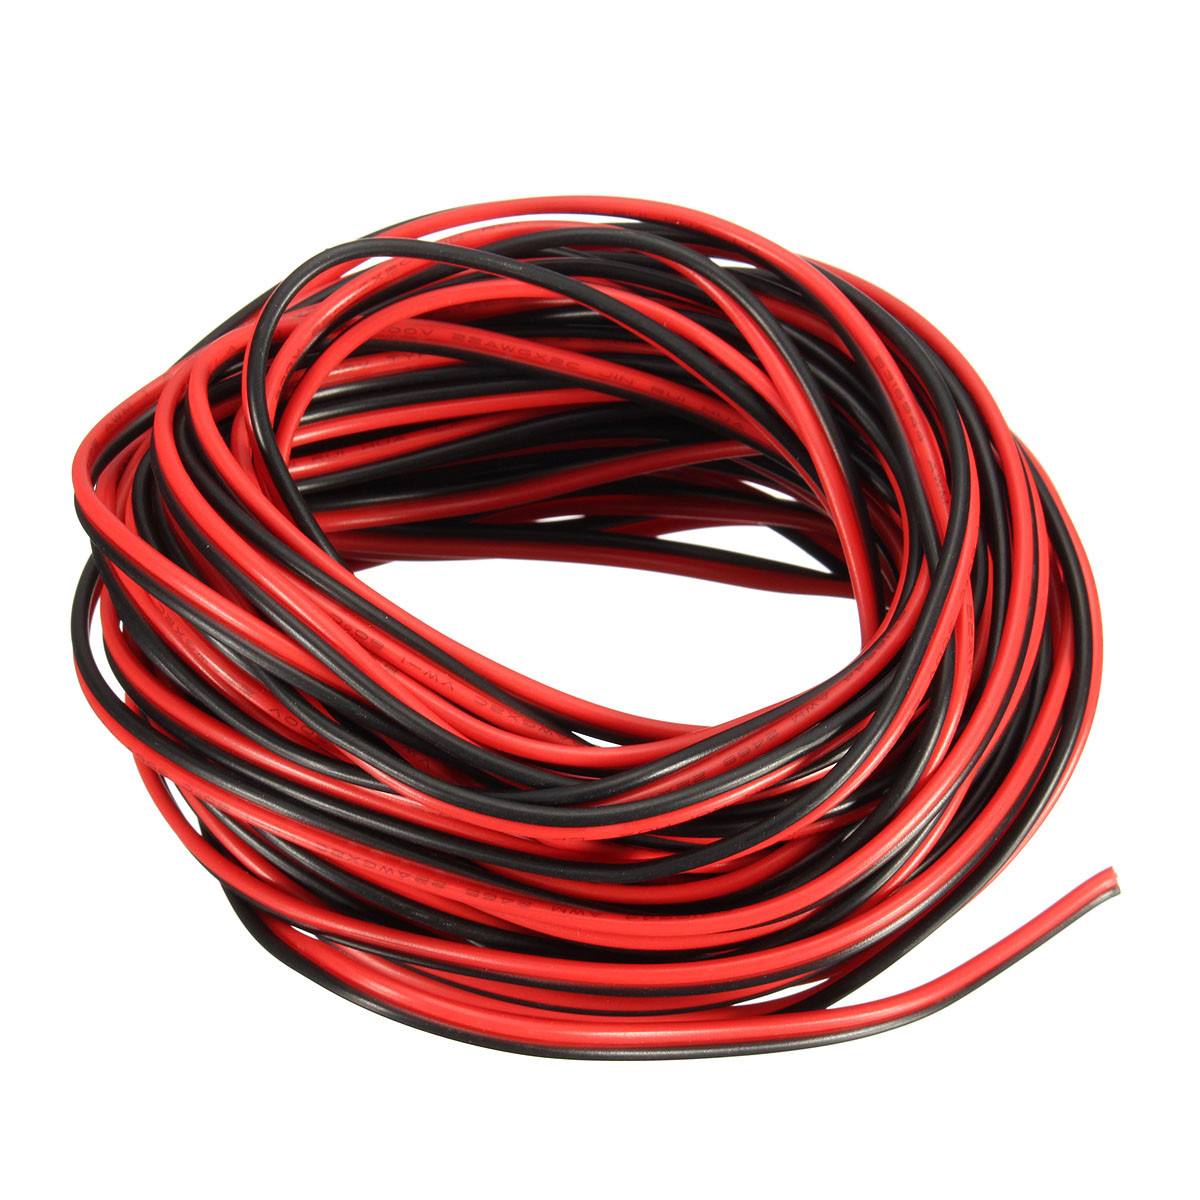 DANIU-10M-22AWG-72V-PVC-Insulated-Wire-2pin-Tinned-Copper-Cable-Electrical-Wire-For-LED-Strip-Extens-1090676-10